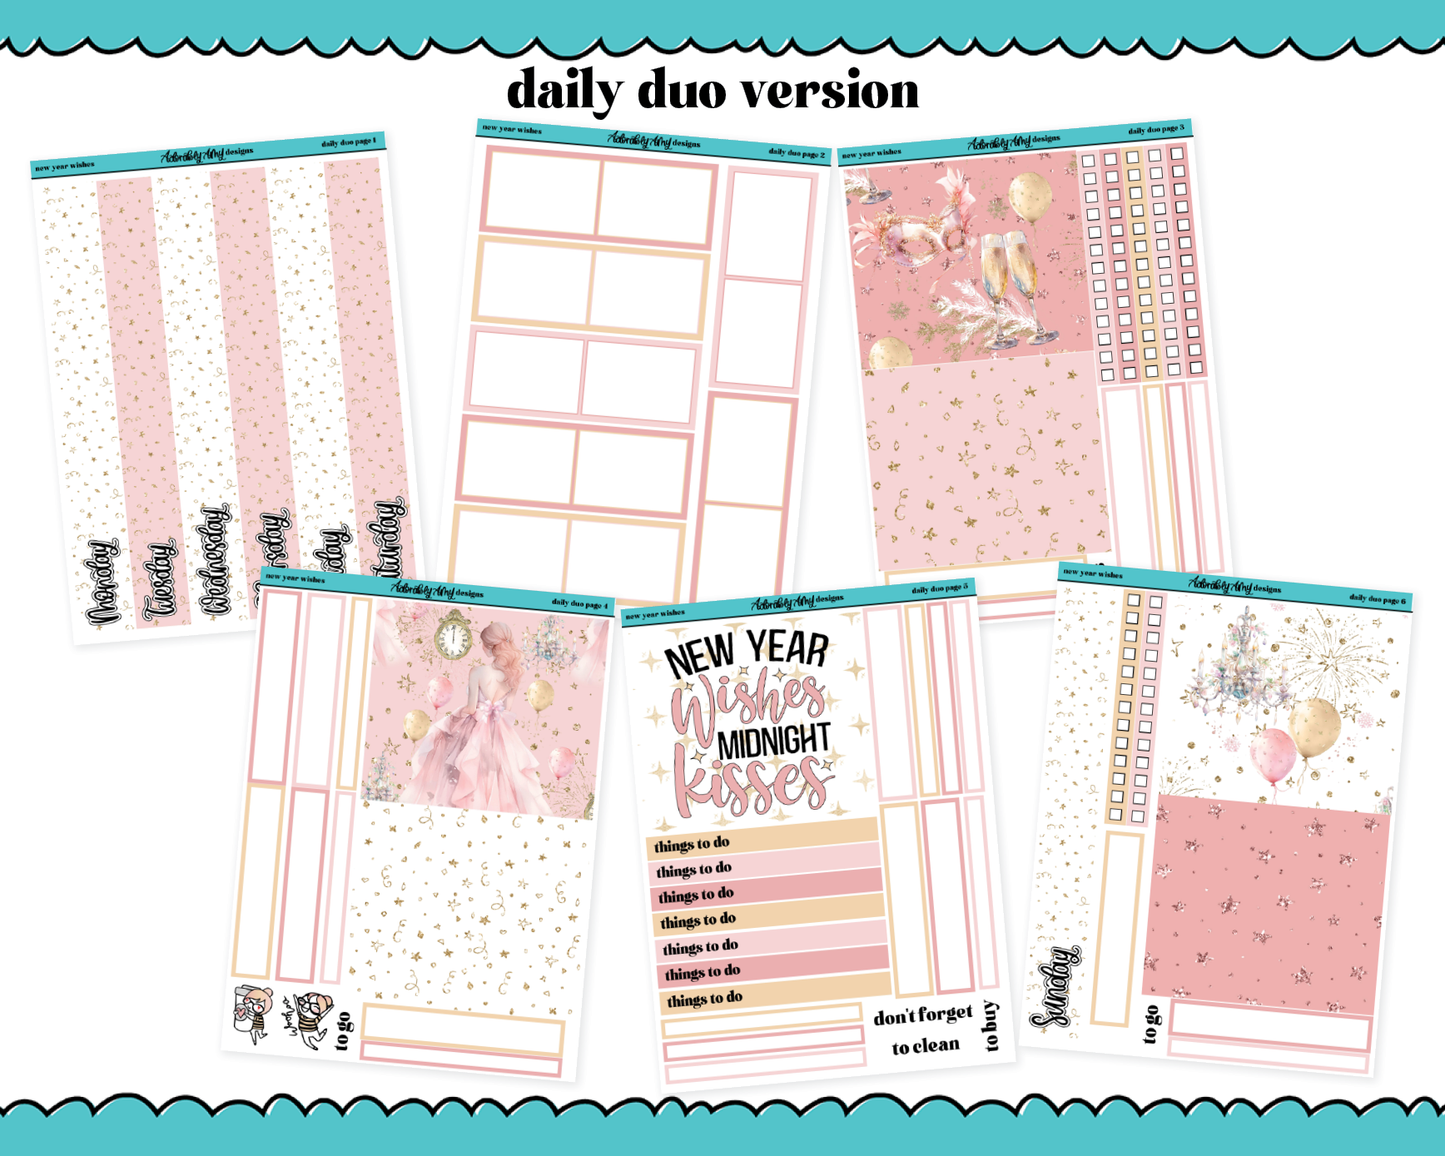 Daily Duo New Years Wishes Weekly Planner Sticker Kit for Daily Duo Planner